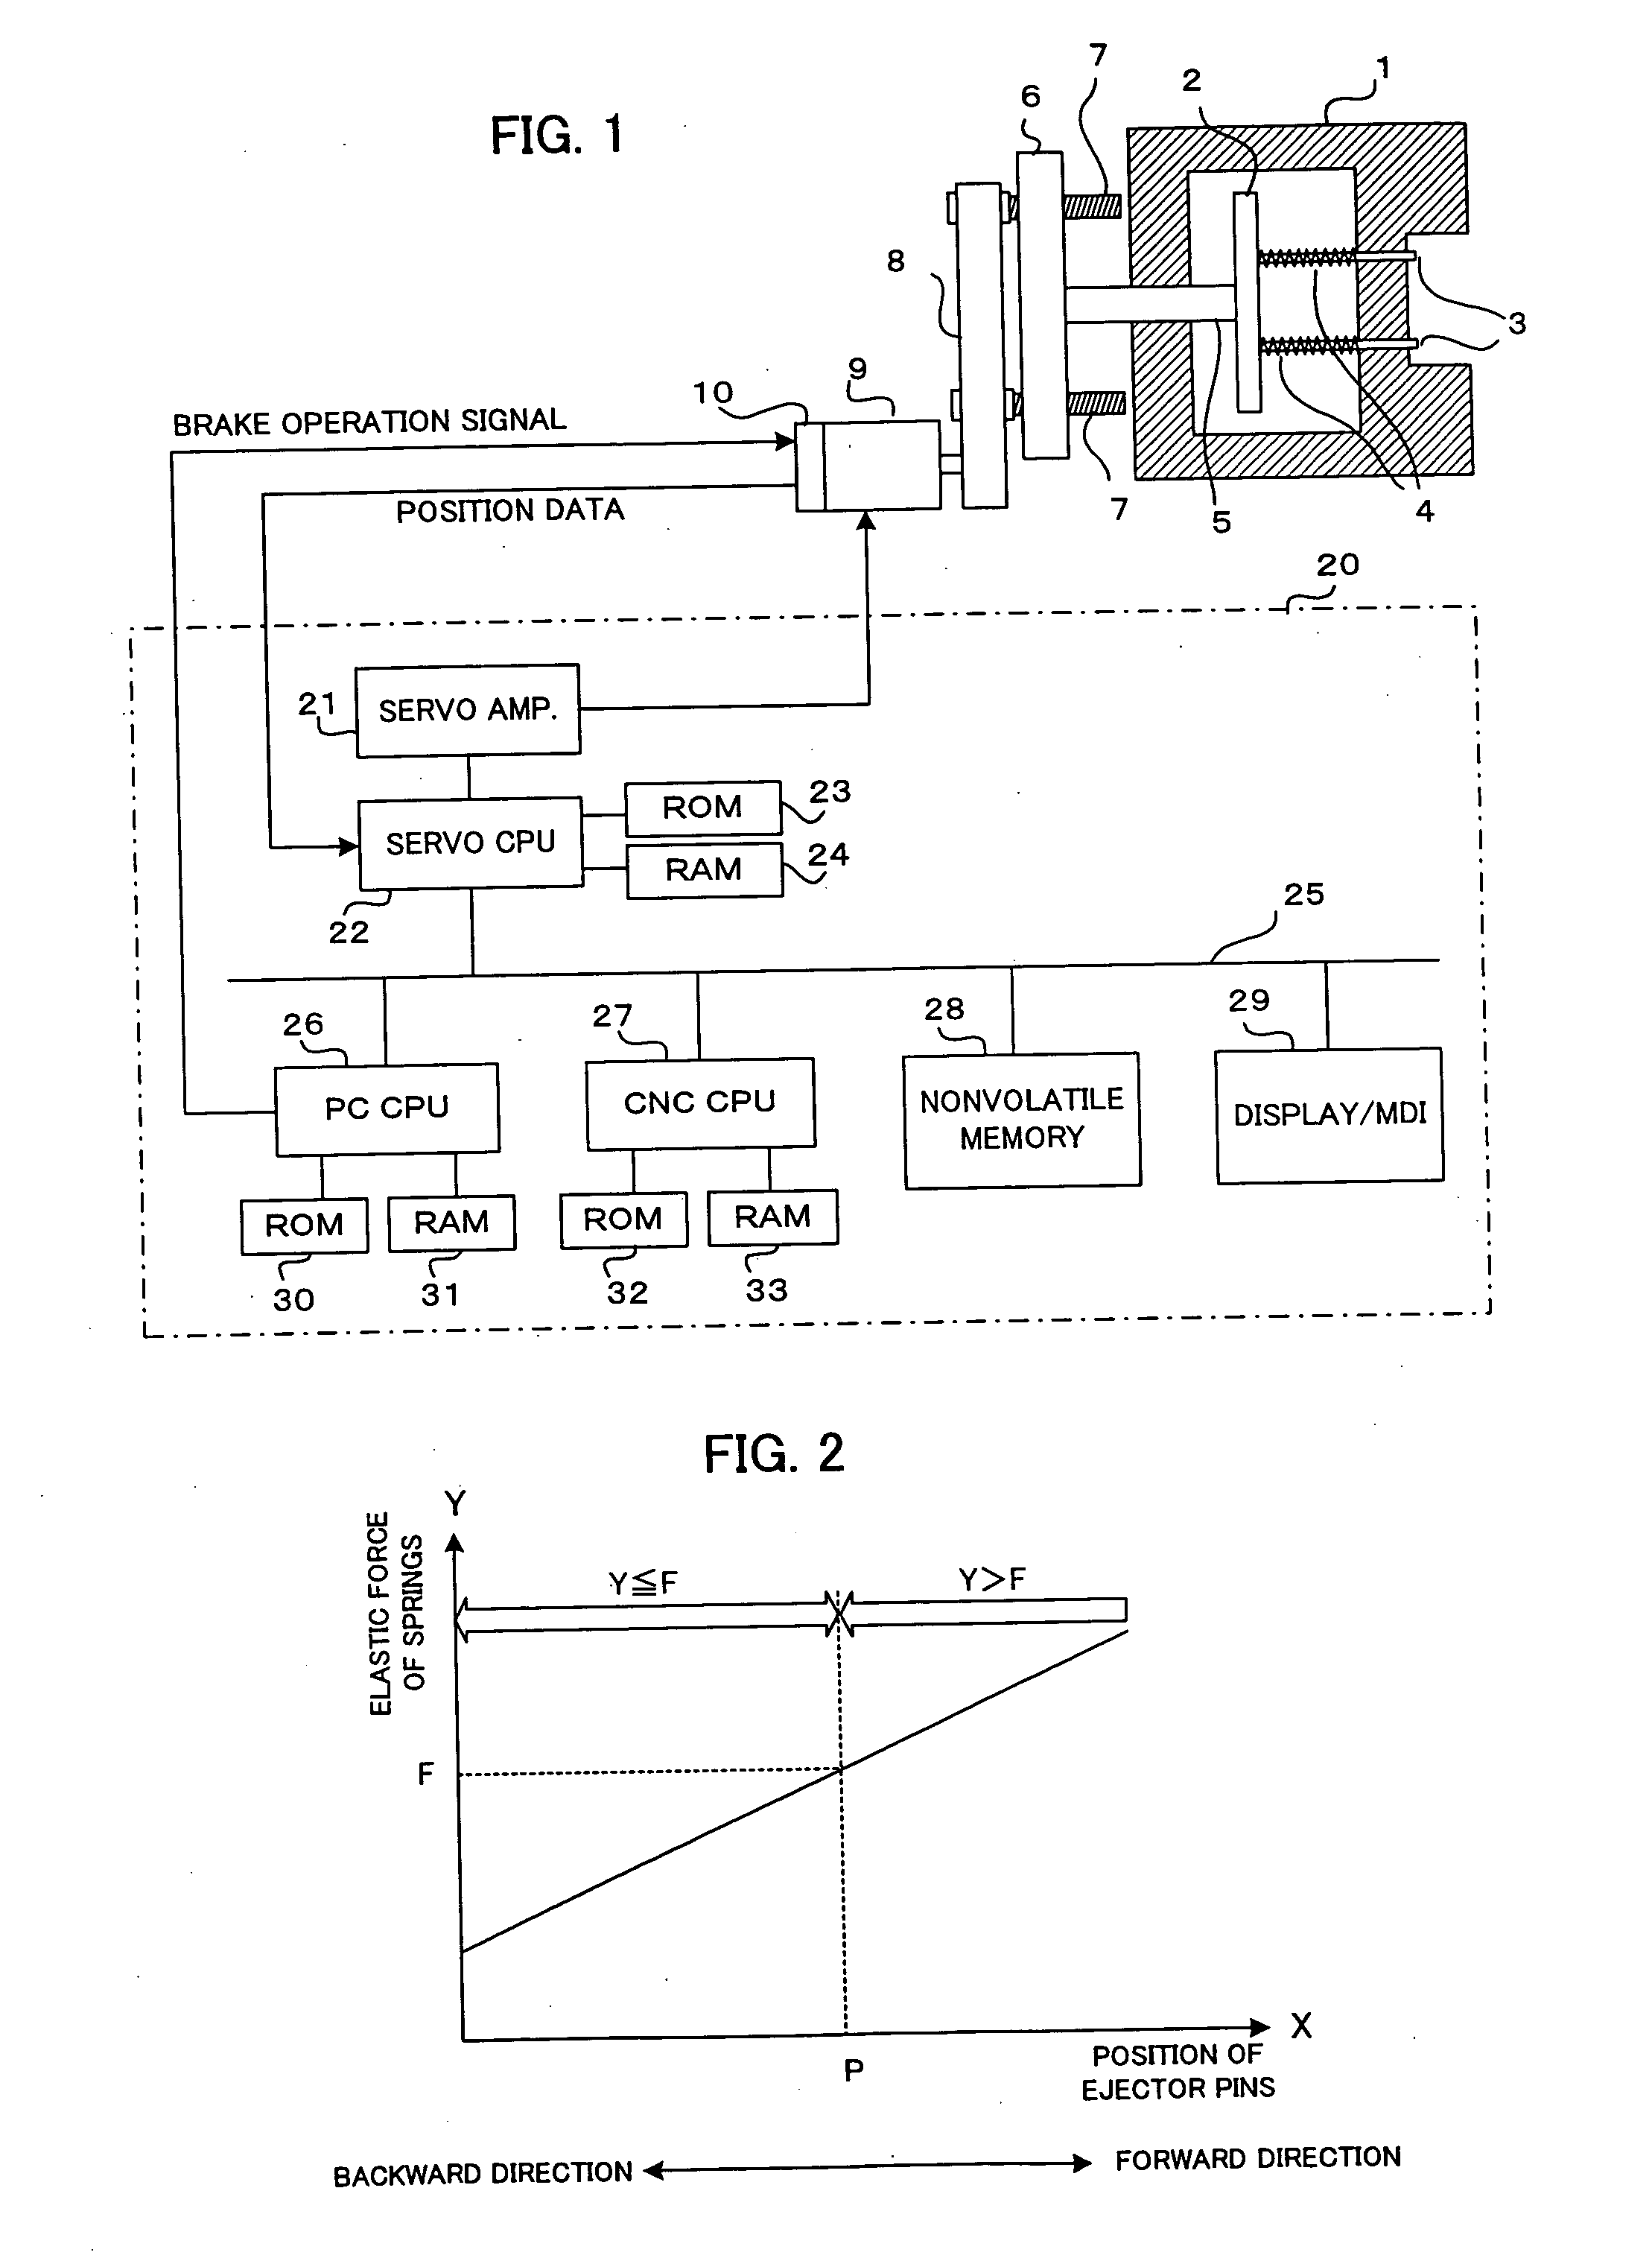 Controller of ejector mechanism in injection molding machine and method of setting terminal position of forward motion of ejector pins of ejector mechanism